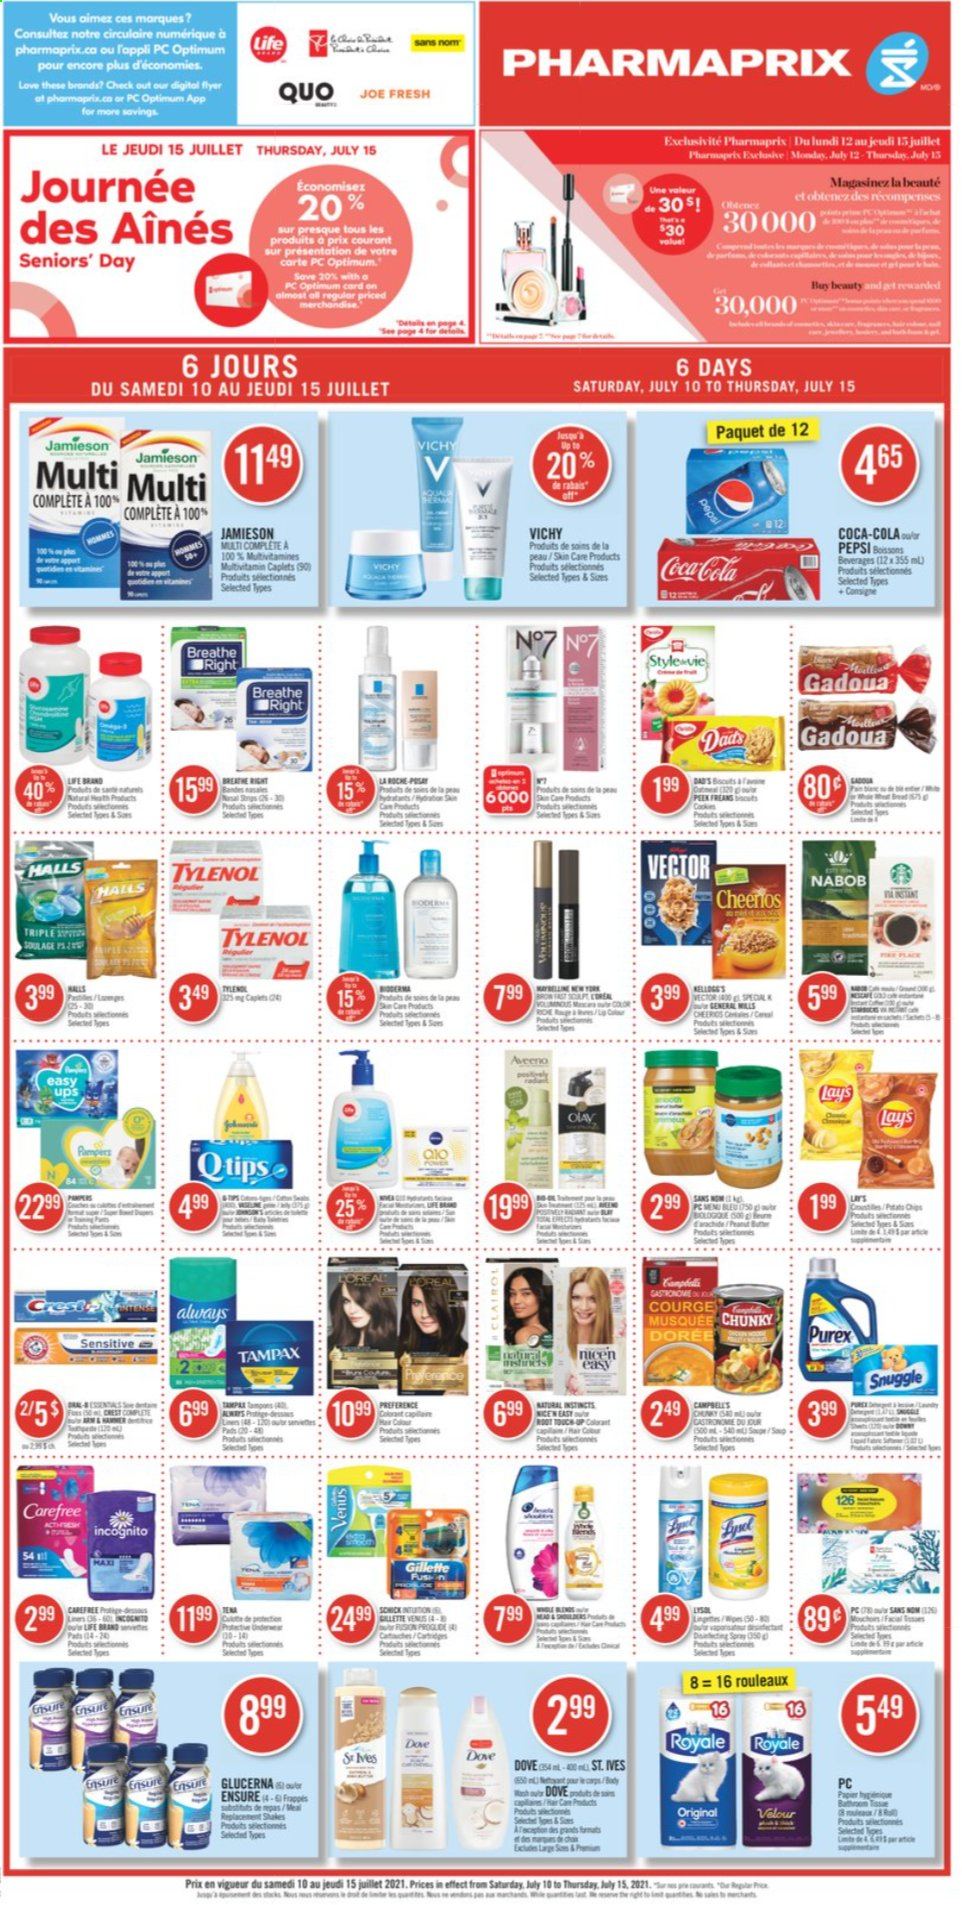 thumbnail - Pharmaprix Flyer - July 10, 2021 - July 15, 2021 - Sales products - Halls, Lay’s, Coca-Cola, Pepsi, Aveeno, Snuggle, Purex, Vichy, Always pads, Carefree, Olay, Schick, Venus, multivitamin, Tylenol, Glucerna, Gillette, Tampax, Pampers. Page 1.